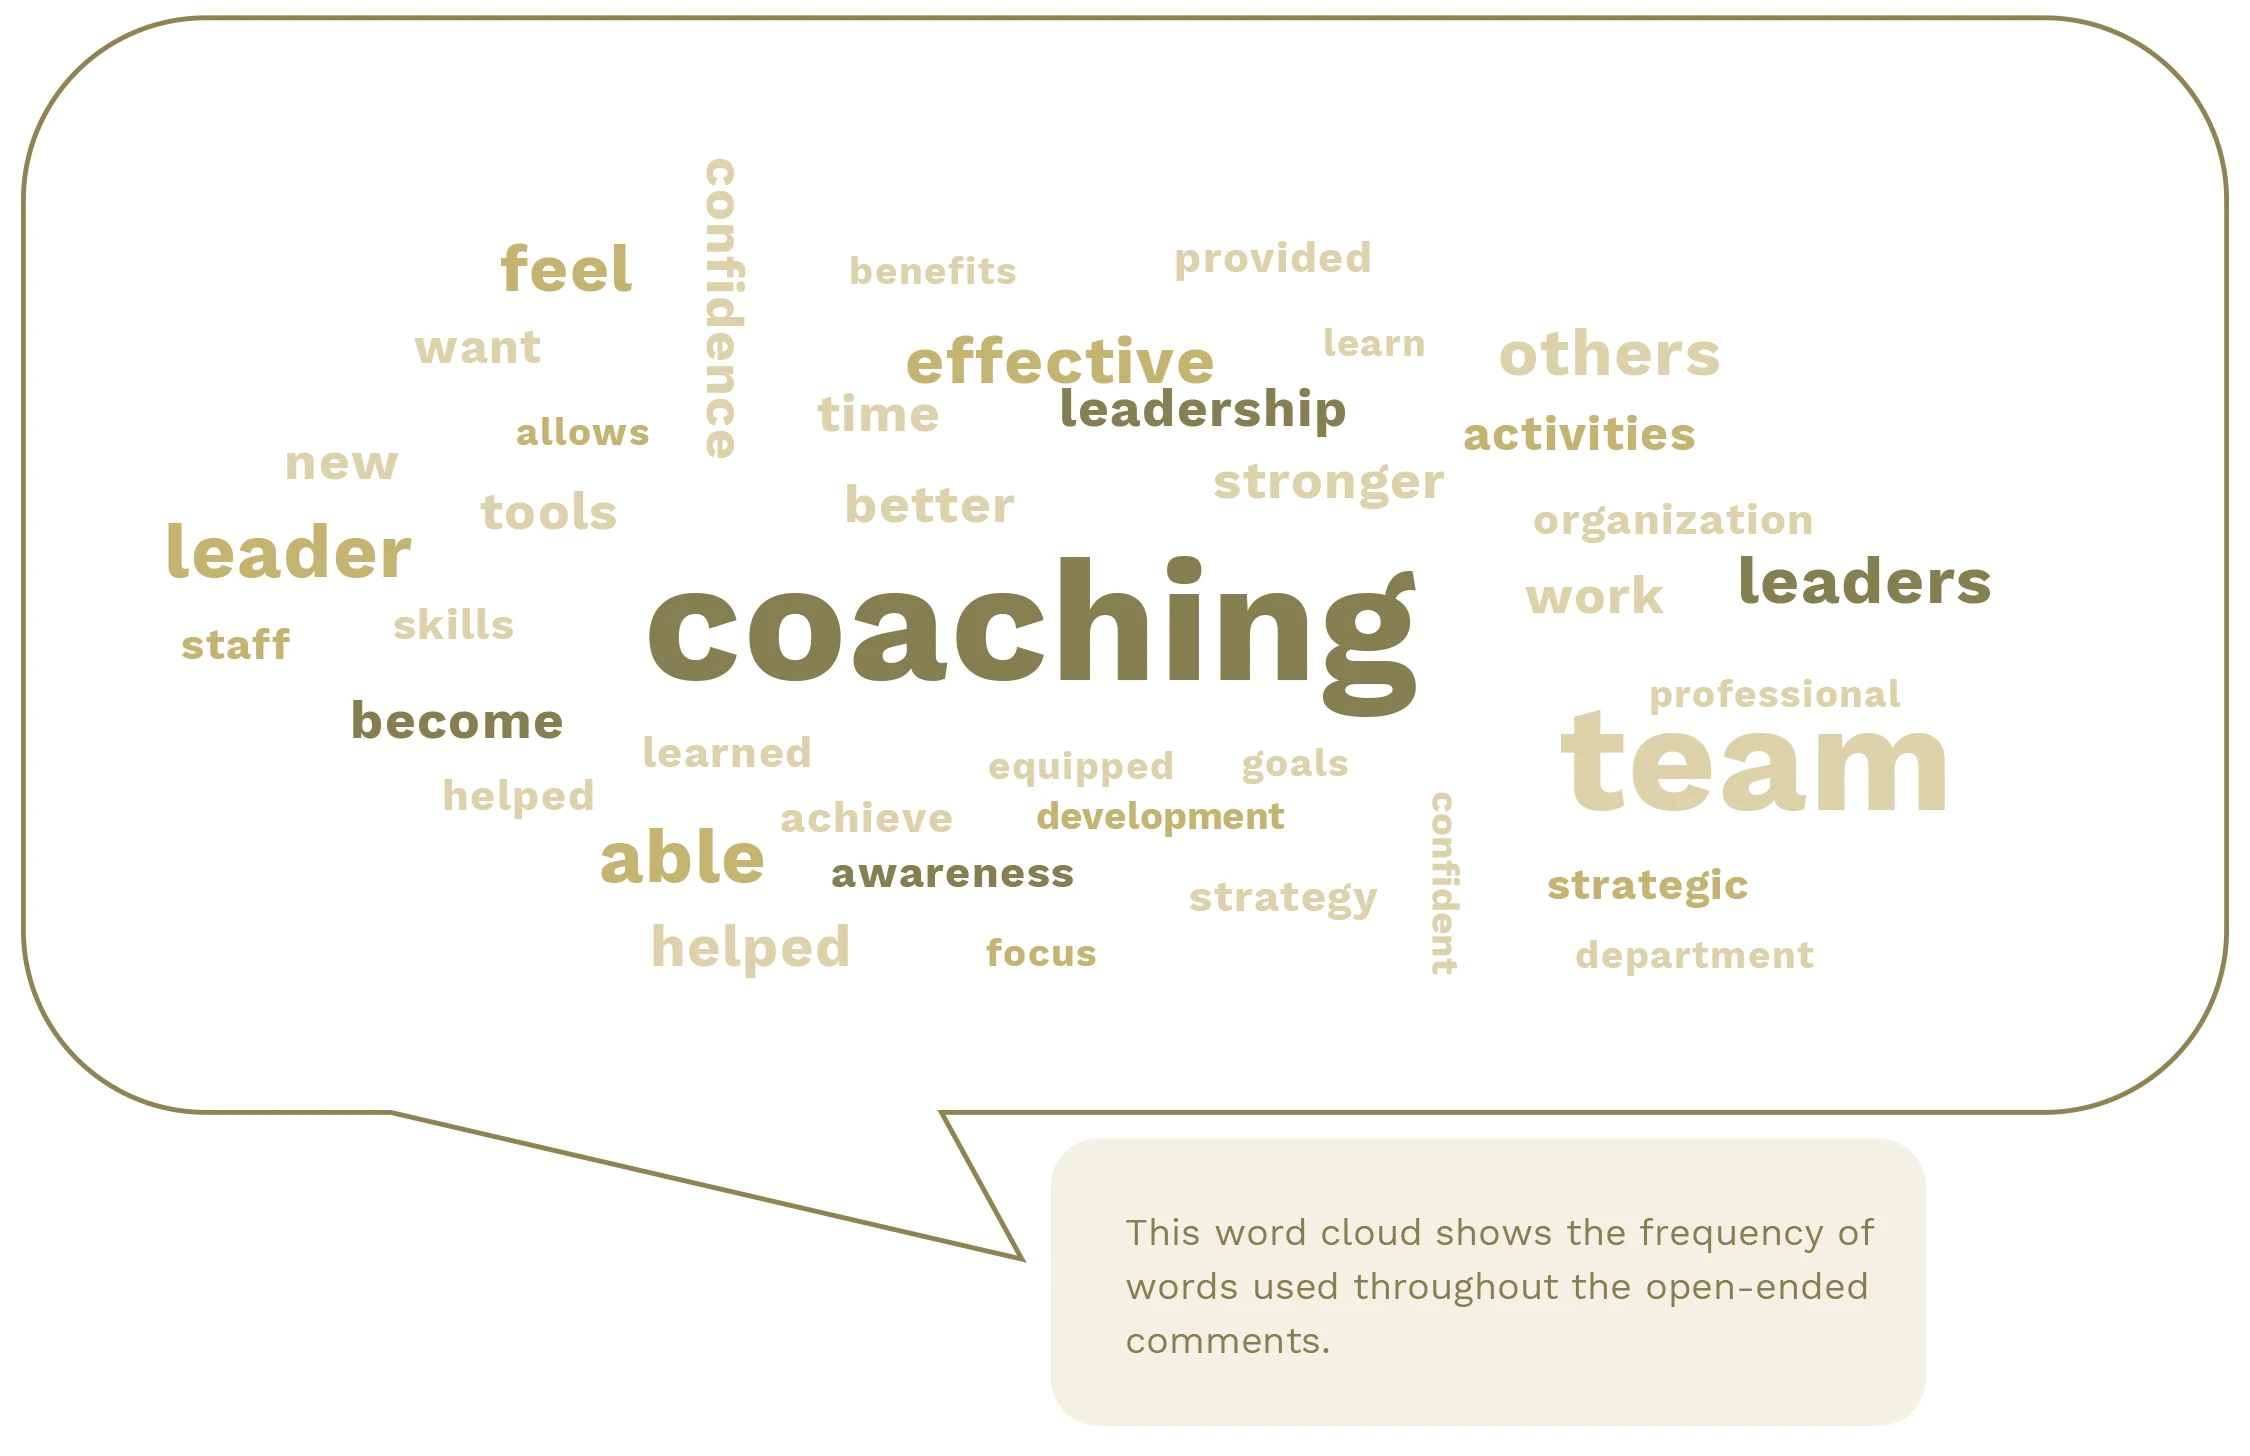 These powerful, unfiltered words describe how coaching impacts leaders.